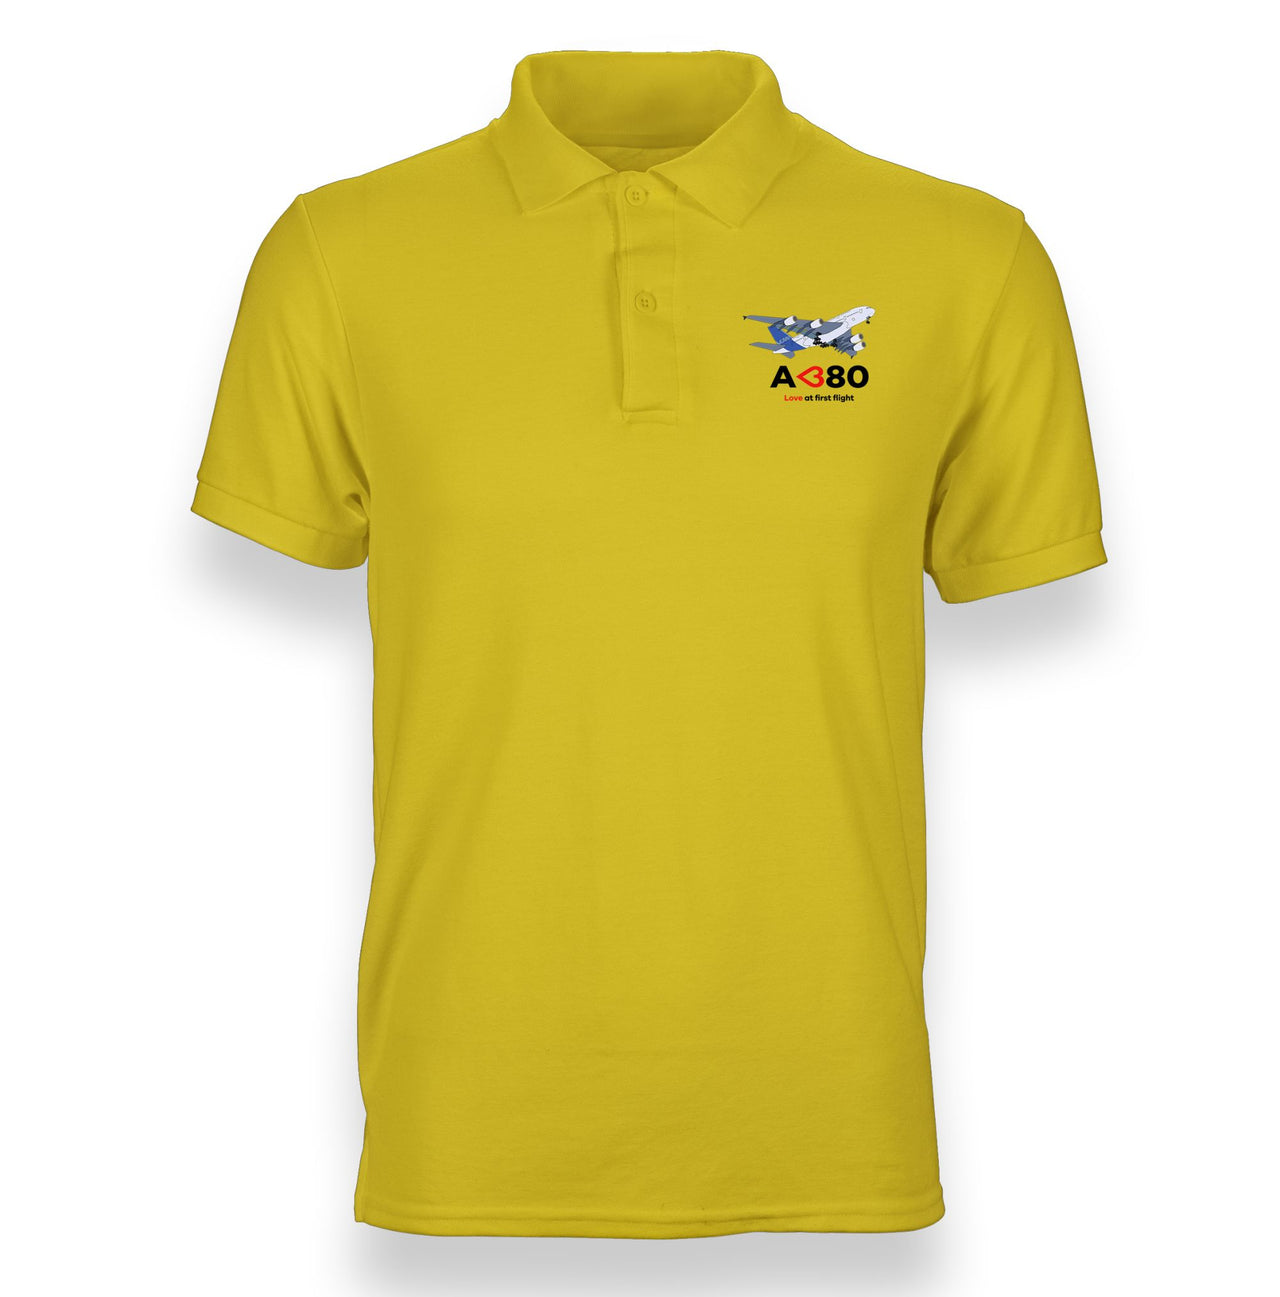 Airbus A380 Love at first flight Designed "WOMEN" Polo T-Shirts